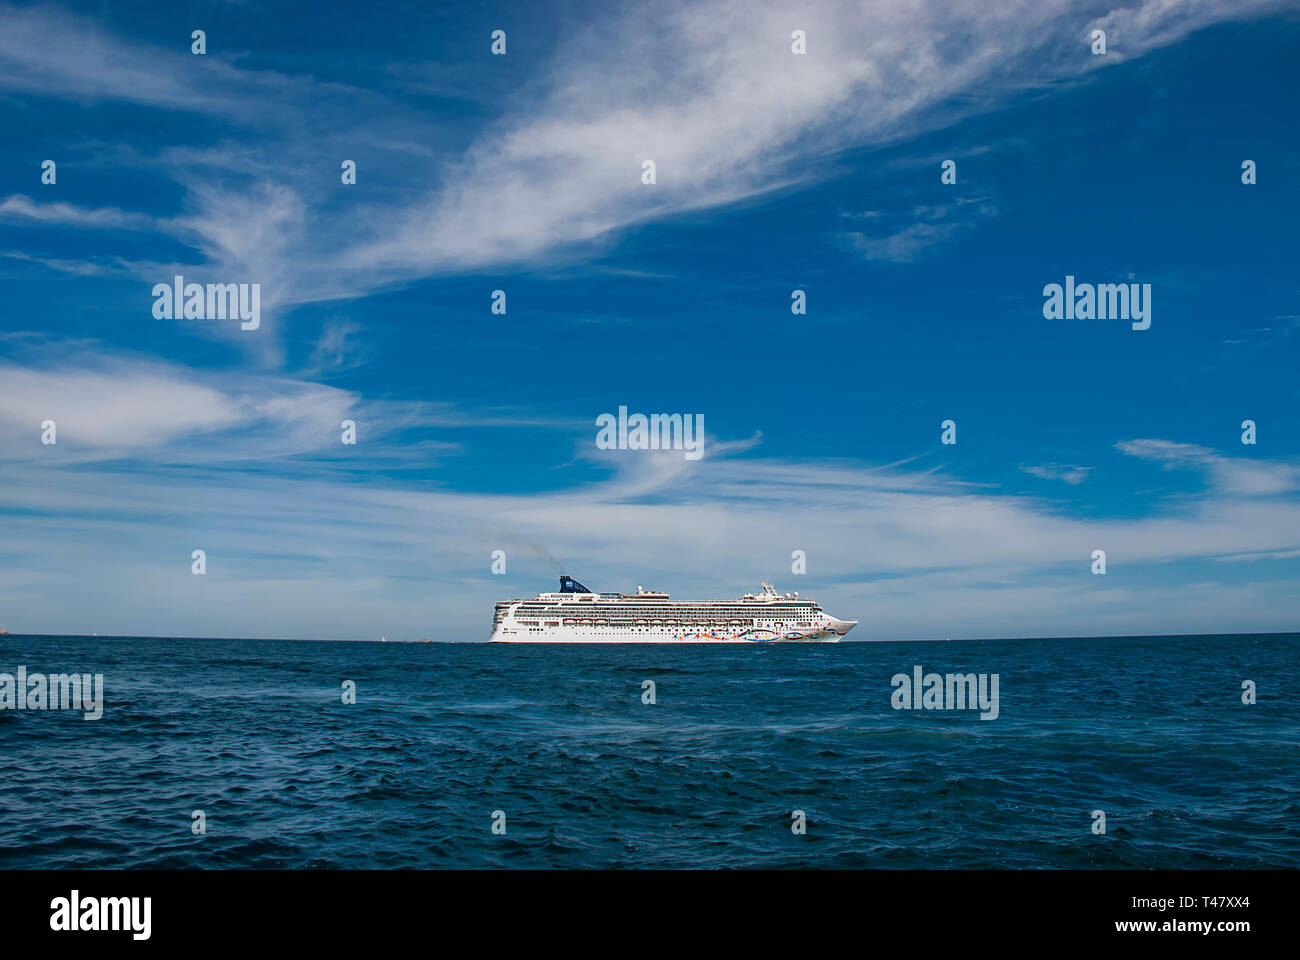 A cruise ship on the horizon in the Pacific Ocean Stock Photo